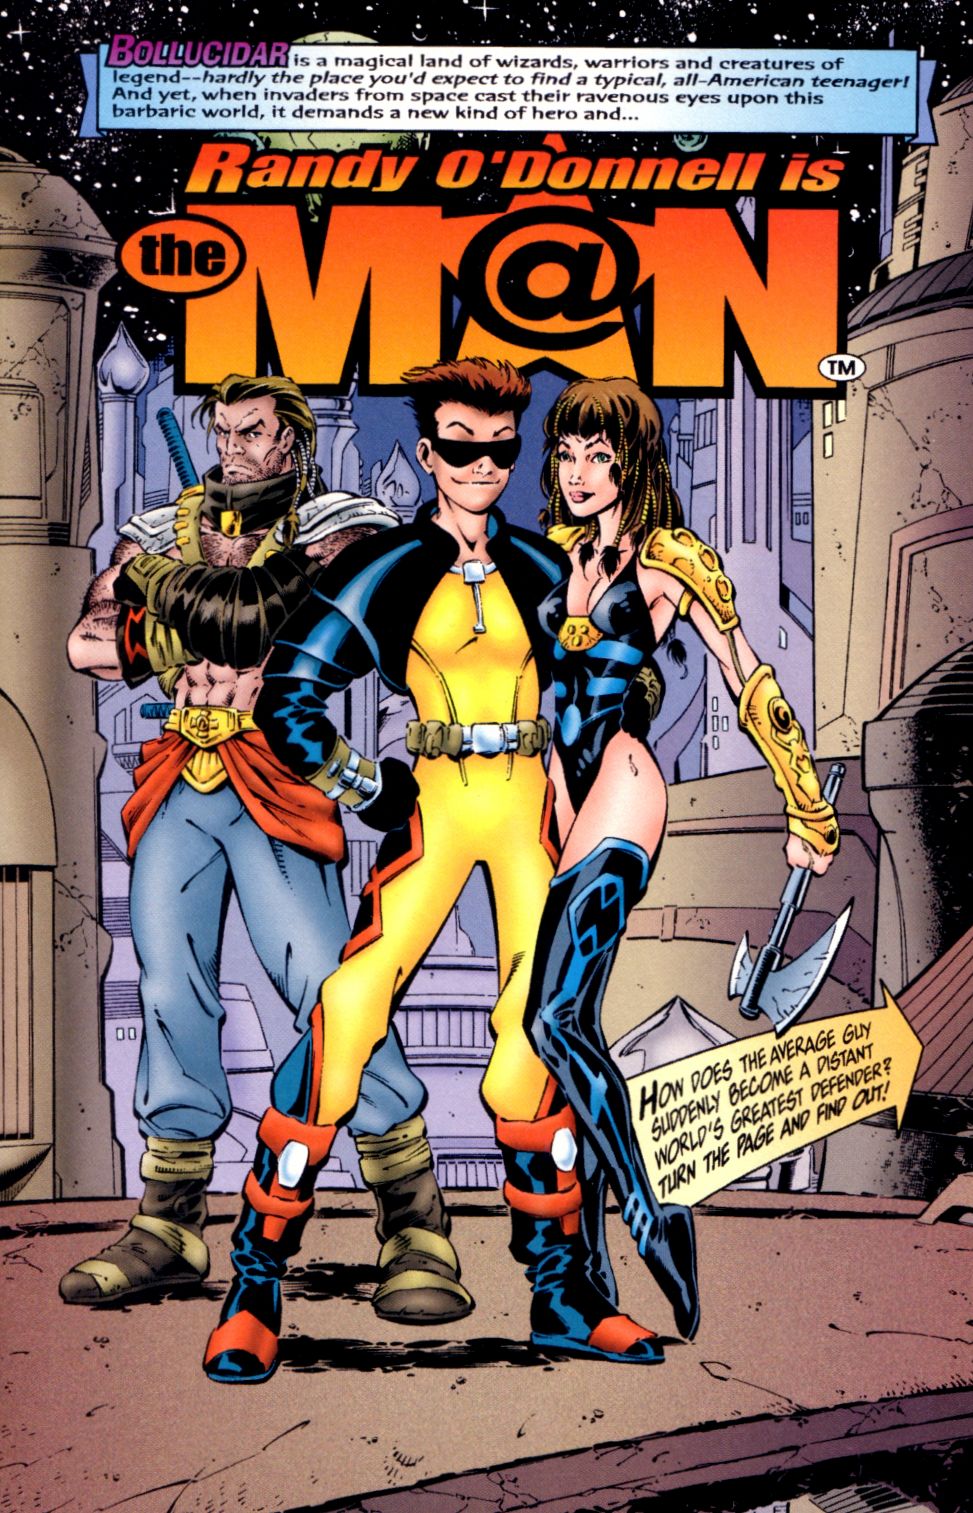 Read online Randy O'Donnell is The M@N comic -  Issue #1 - 3